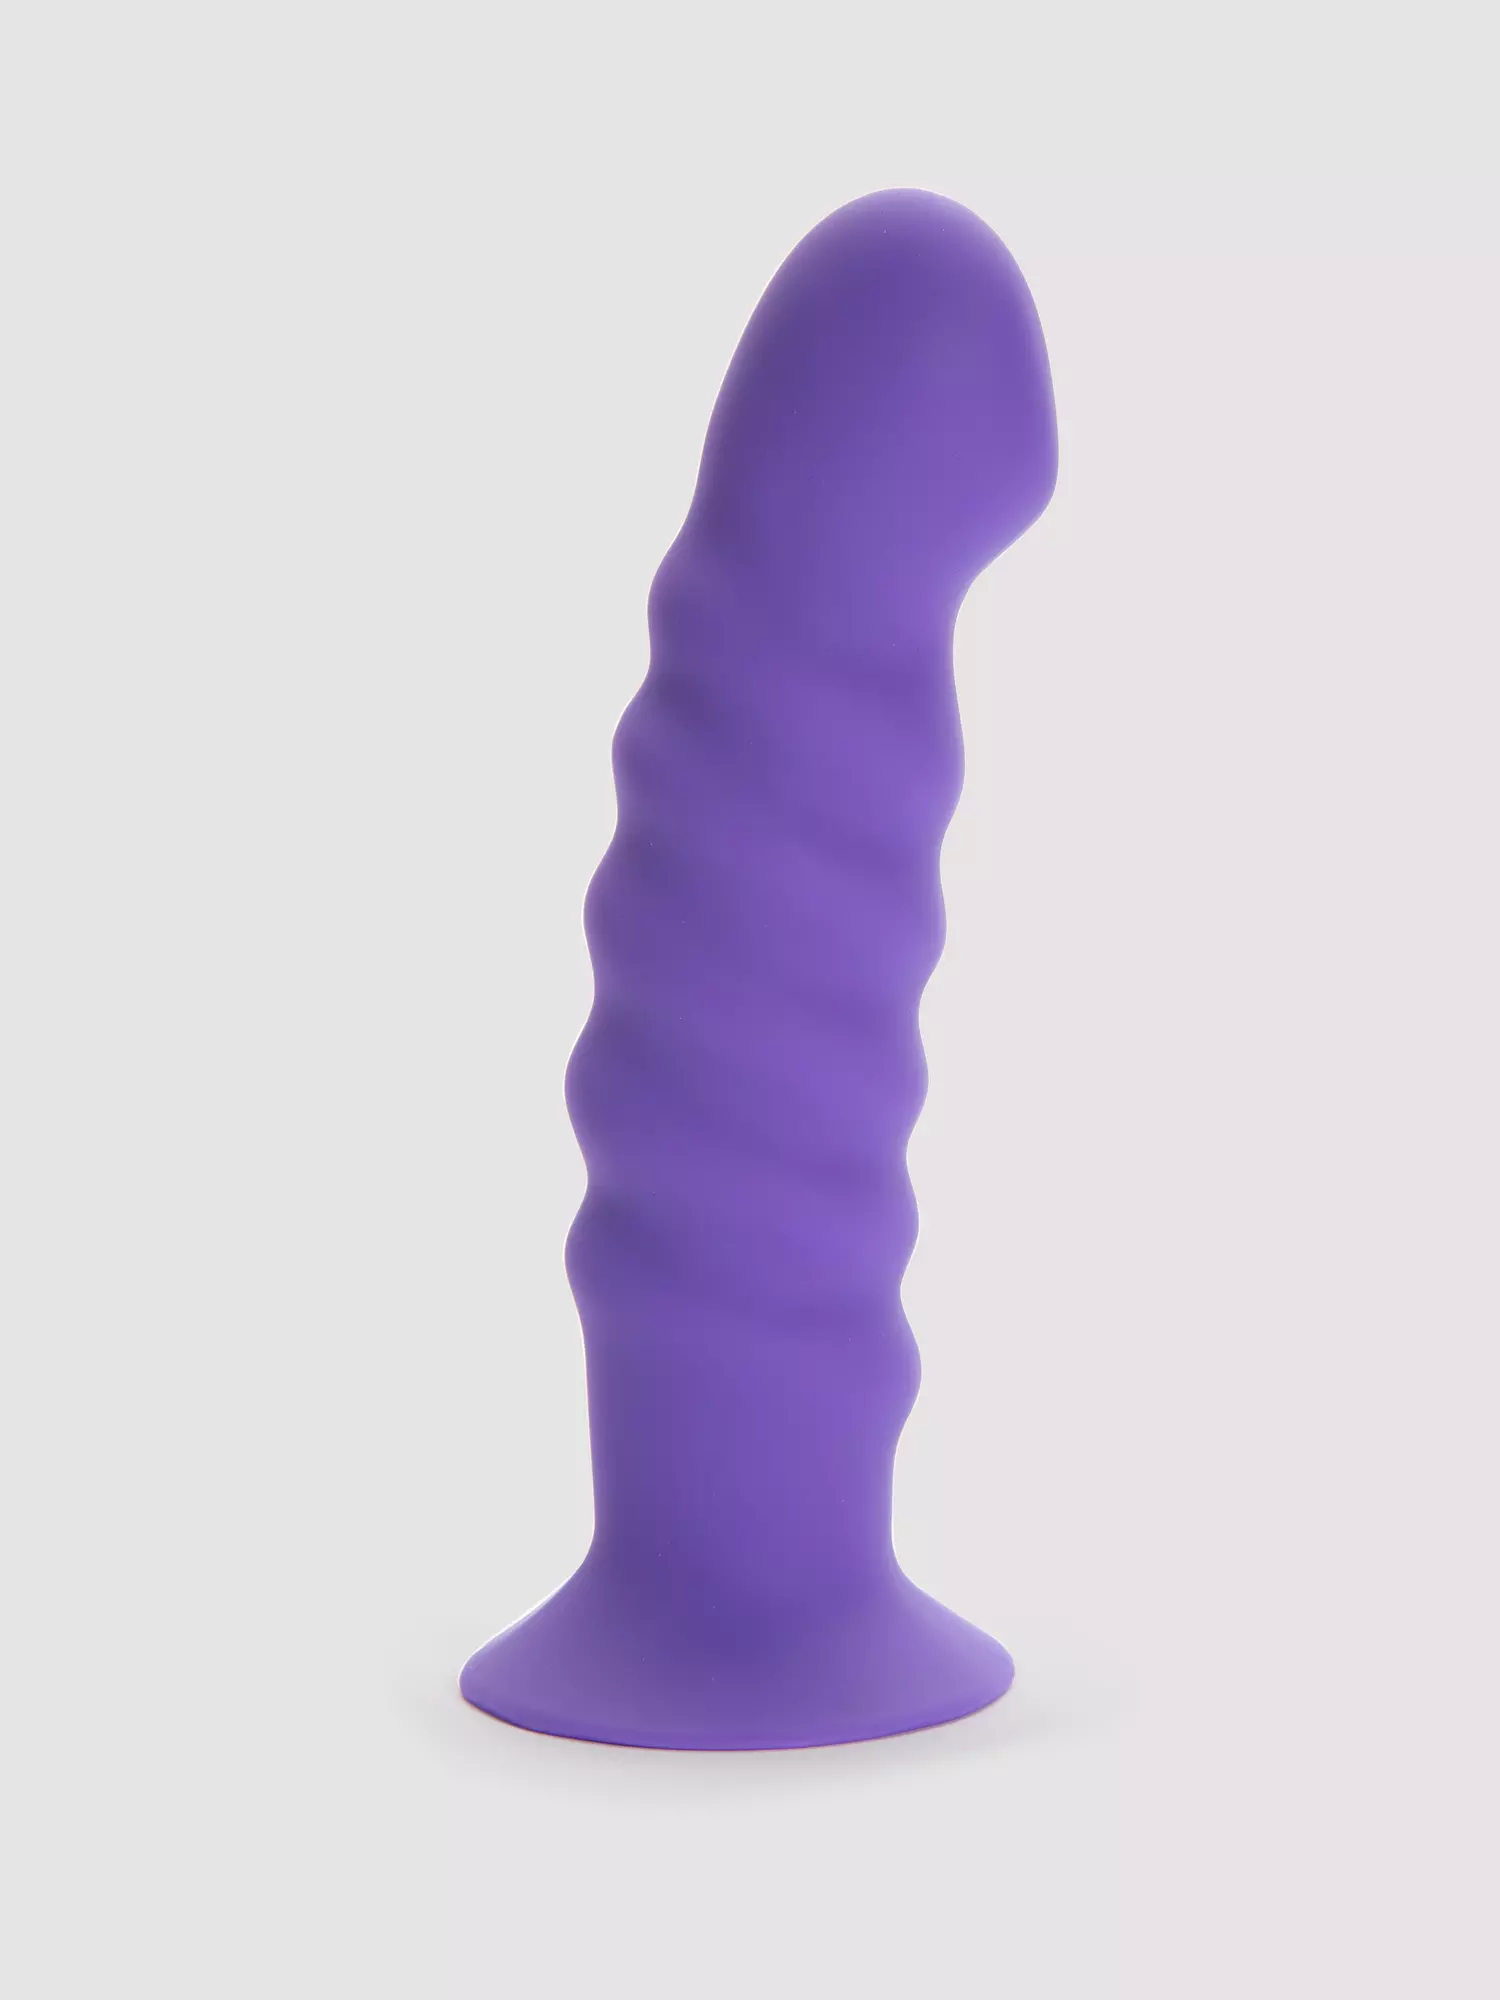 Maia Kendall Swirly Silicone Suction Cup Dildo. Slide 13